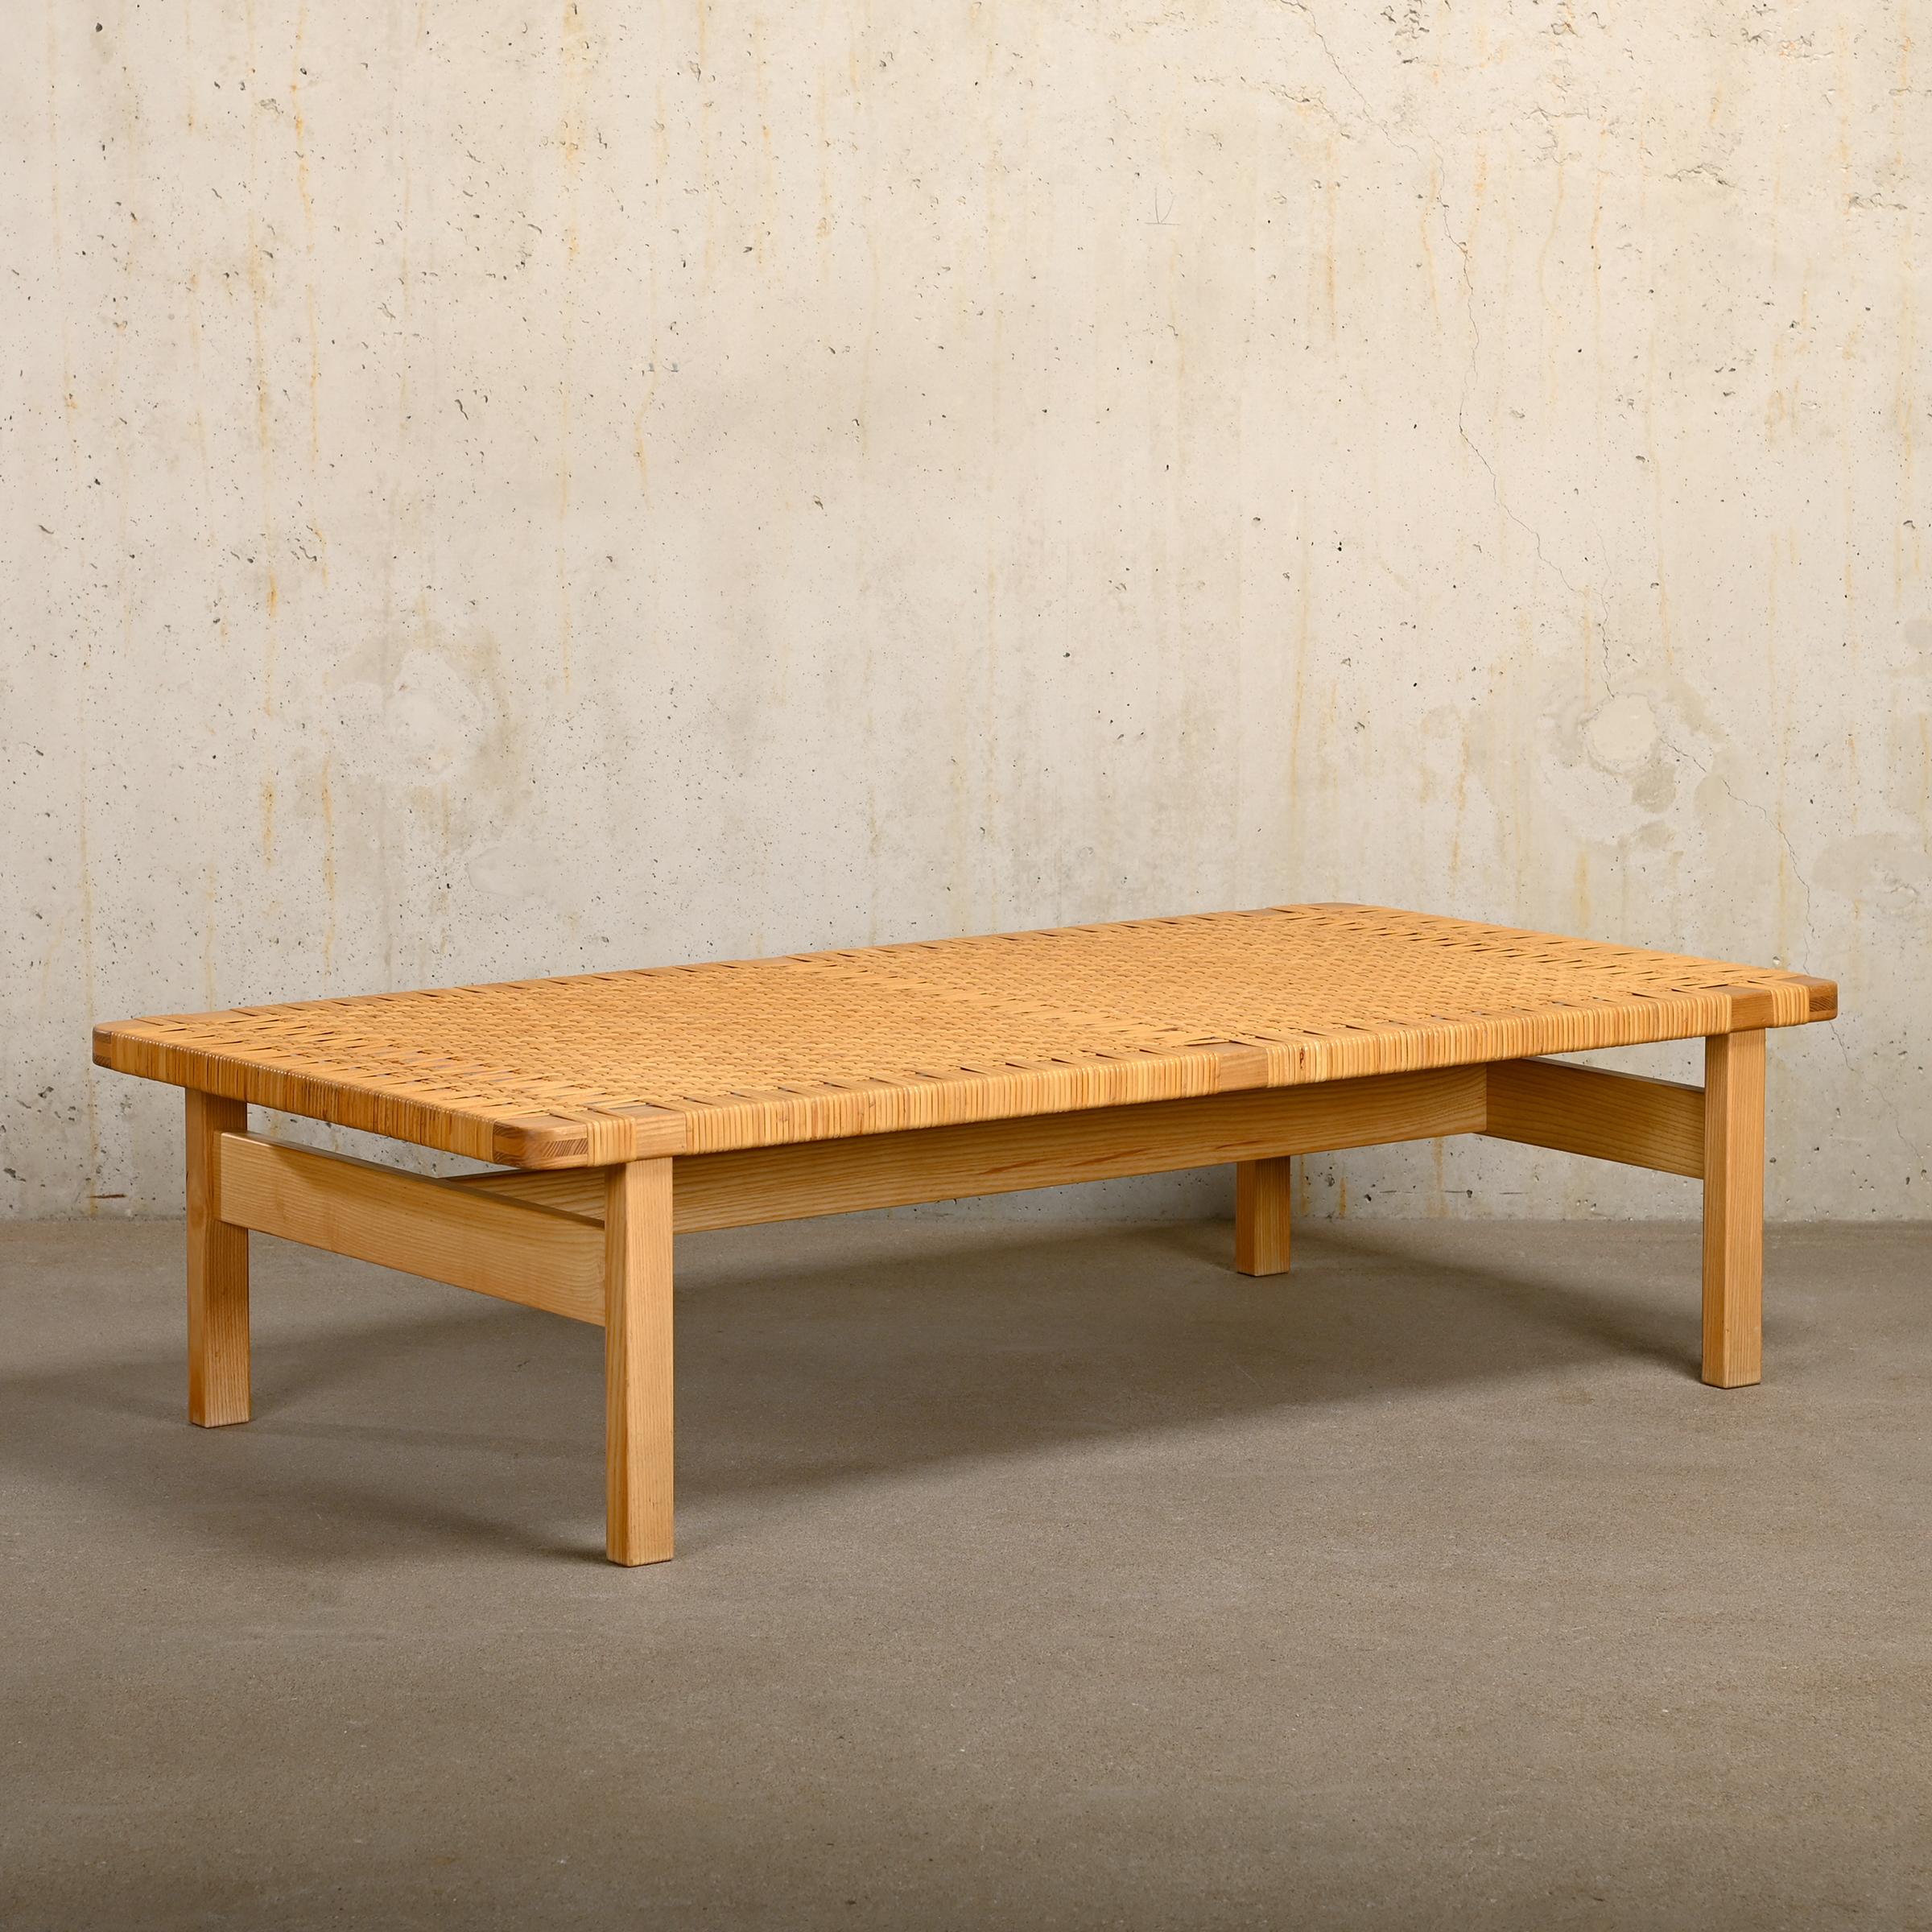 Elegant and rare large model bench / coffee tables (Model 5275) designed by Børge Mogensen for Fredericia Stølefabrik, Denmark in the 50s.Solid oak frame with hand-woven cane all in very good original condition and signed by manufacturer label